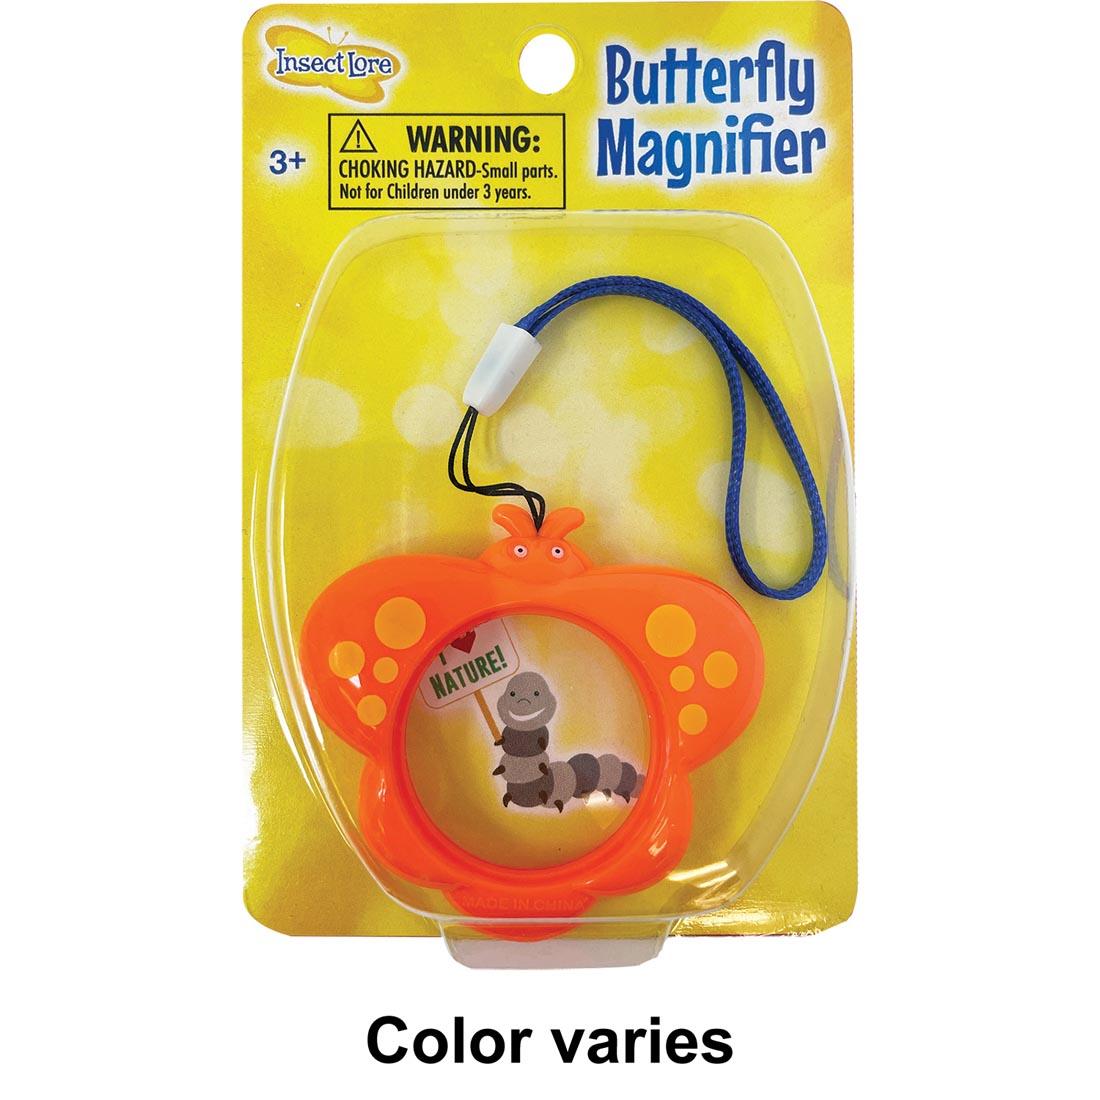 Insect Lore Butterfly Magnifier in package plus text Color Varies